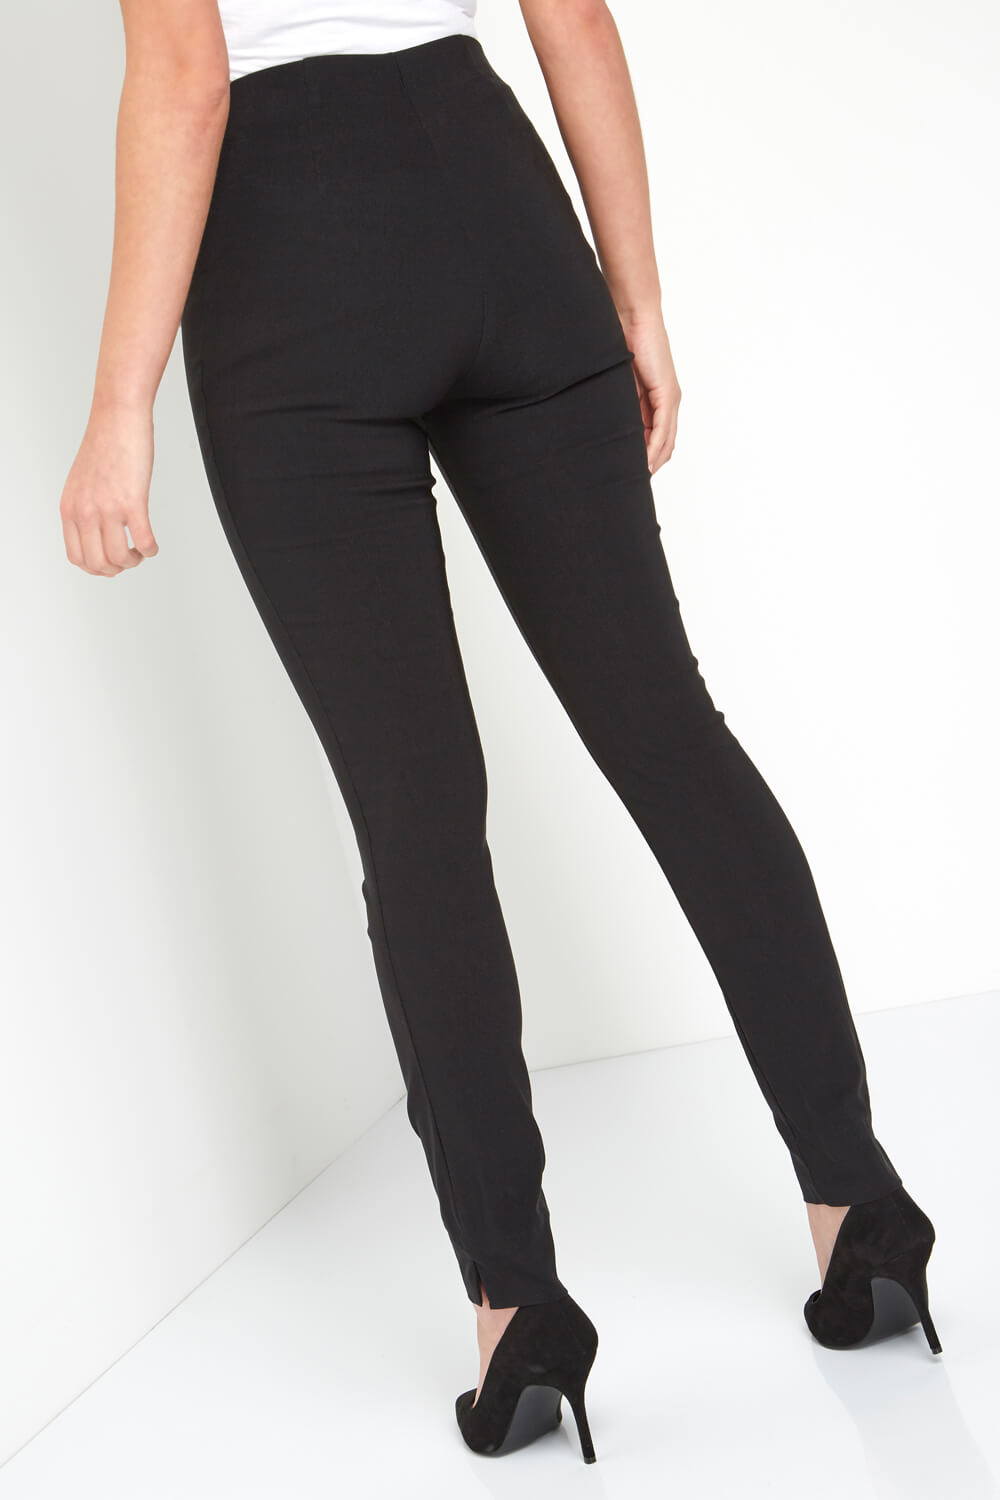 Black Full Length Stretch Trousers, Image 2 of 3